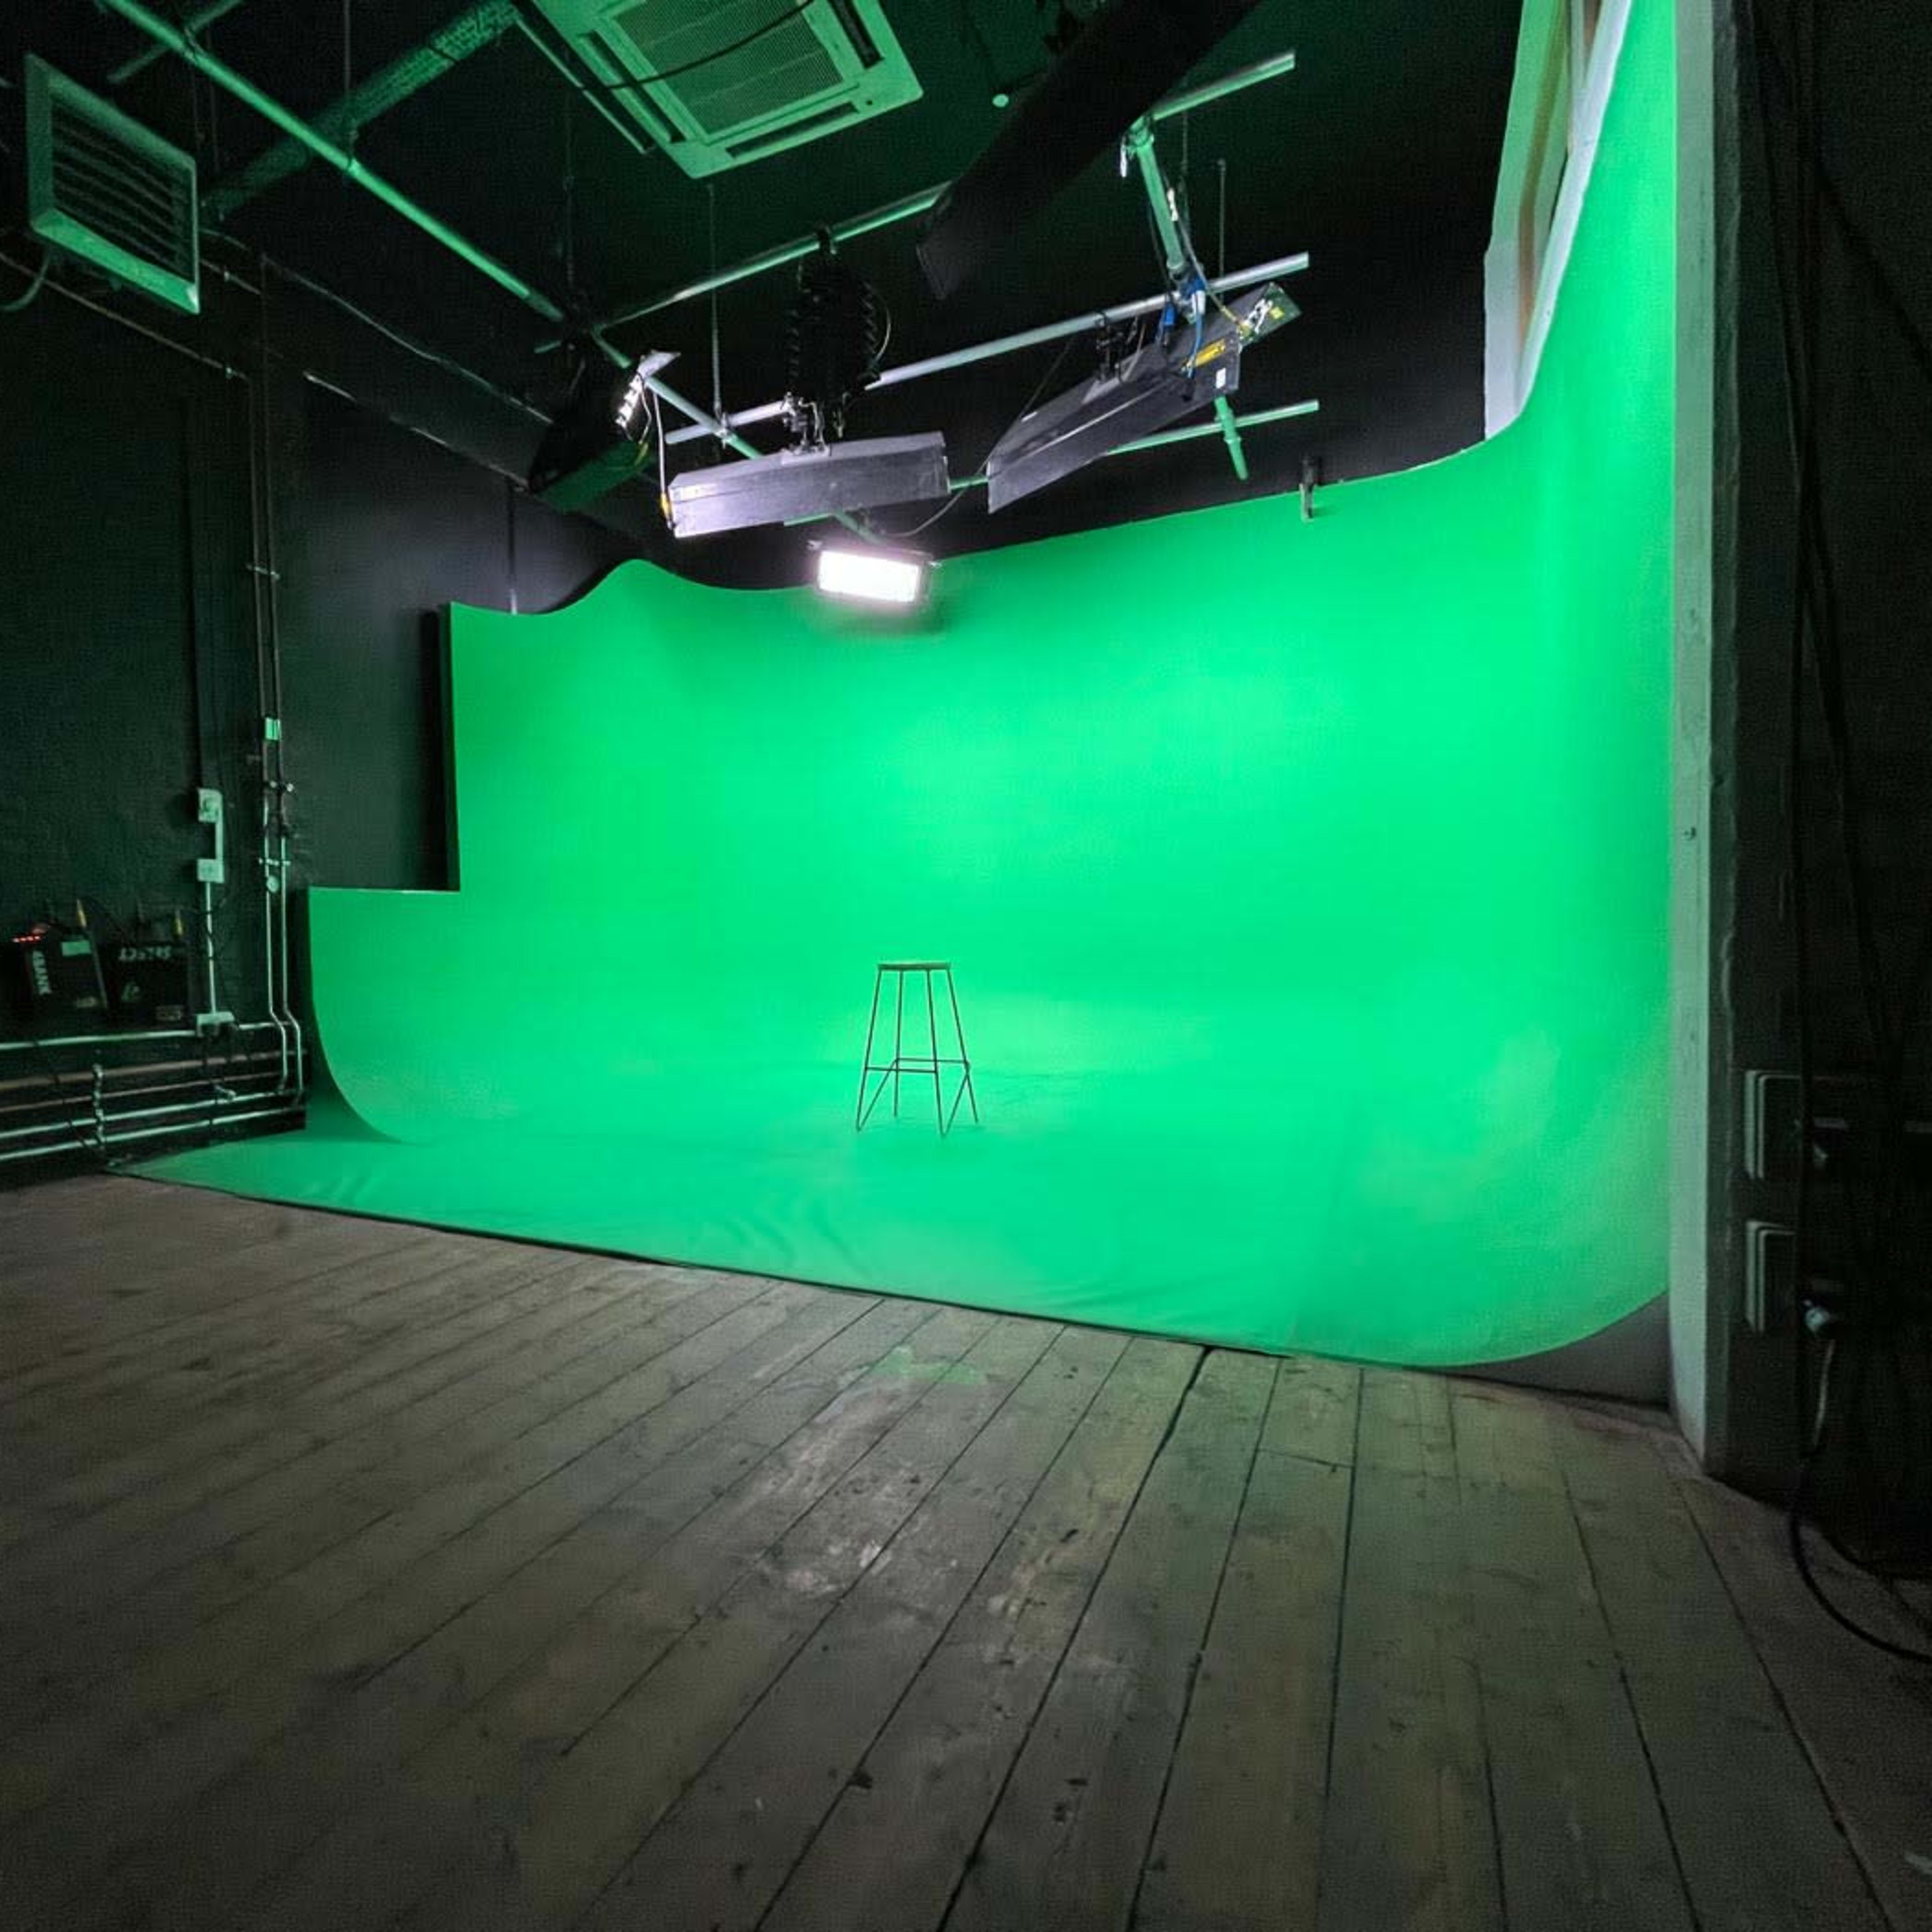 7 Helpful Green Screen Tips to Ace Your Next Shoot - Peerspace